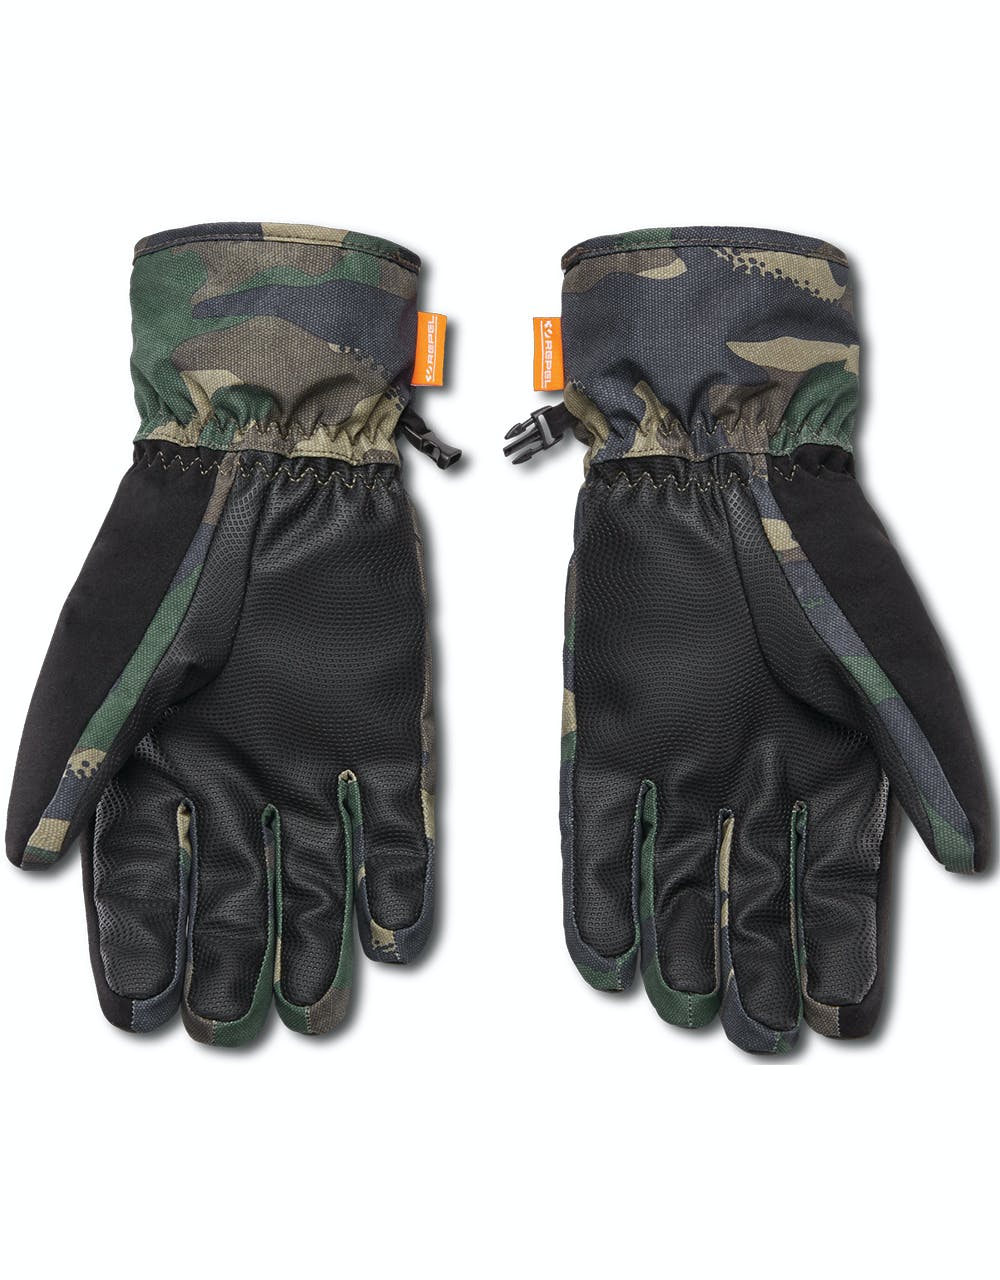 ThirtyTwo Corp 2020 Snowboard Gloves - Camo